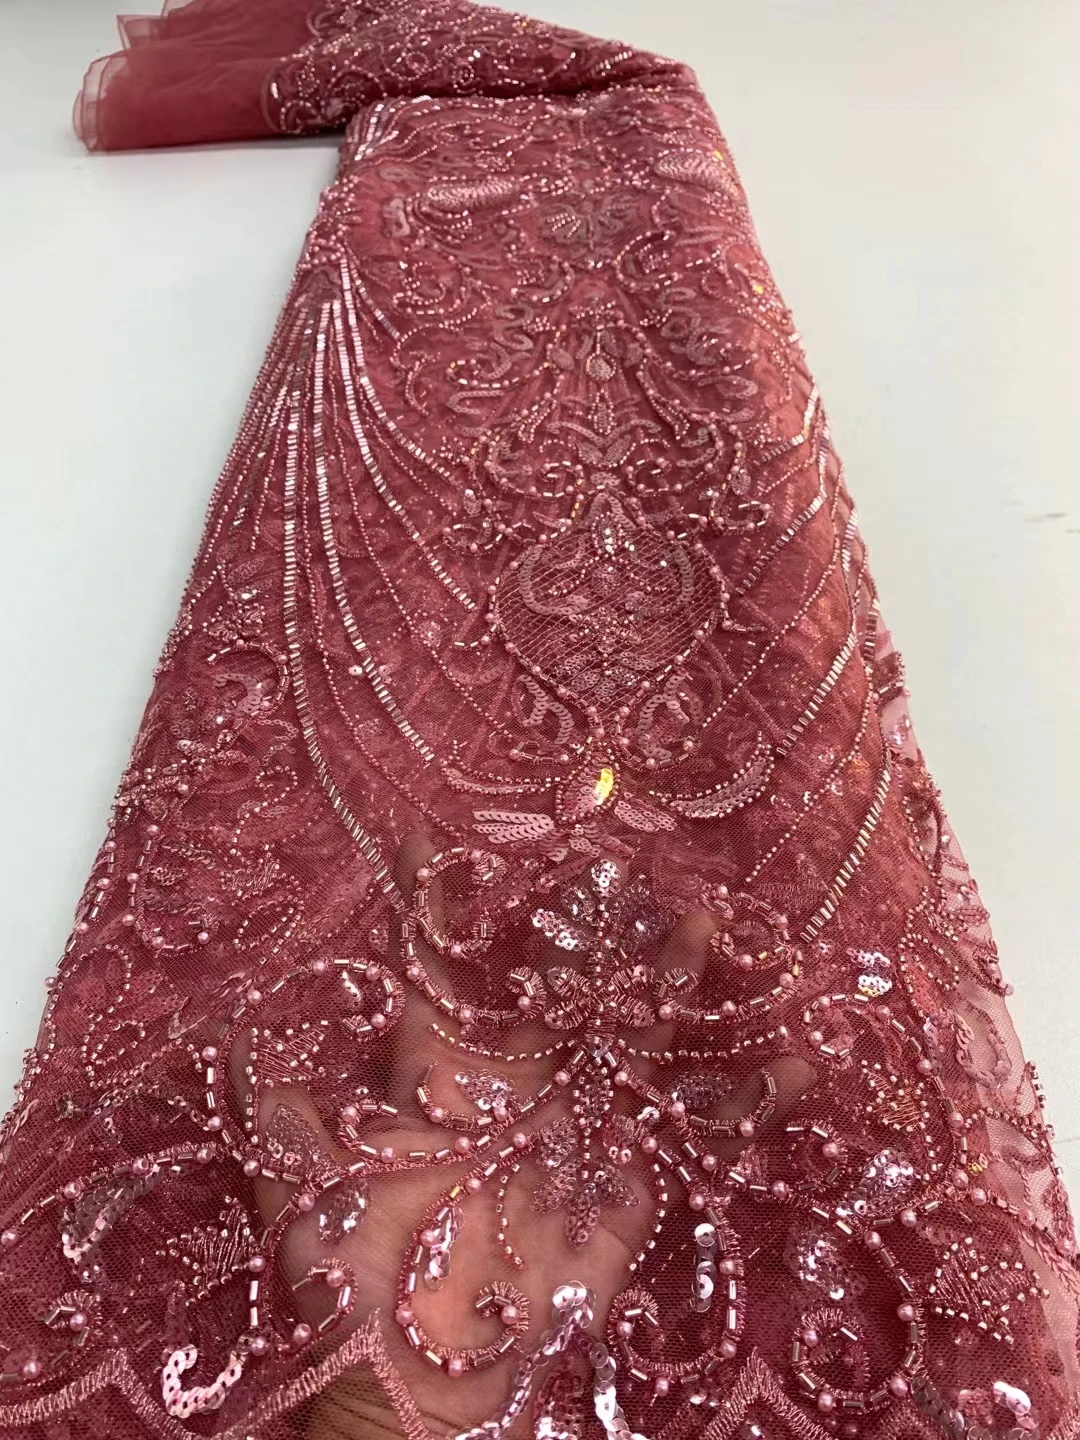 

2022Luxury Hig-End Quality Latest Elegant AfricanTube Lace With Lots Stones Beades Fabric for Wedding Party Long Dress NN369-NN